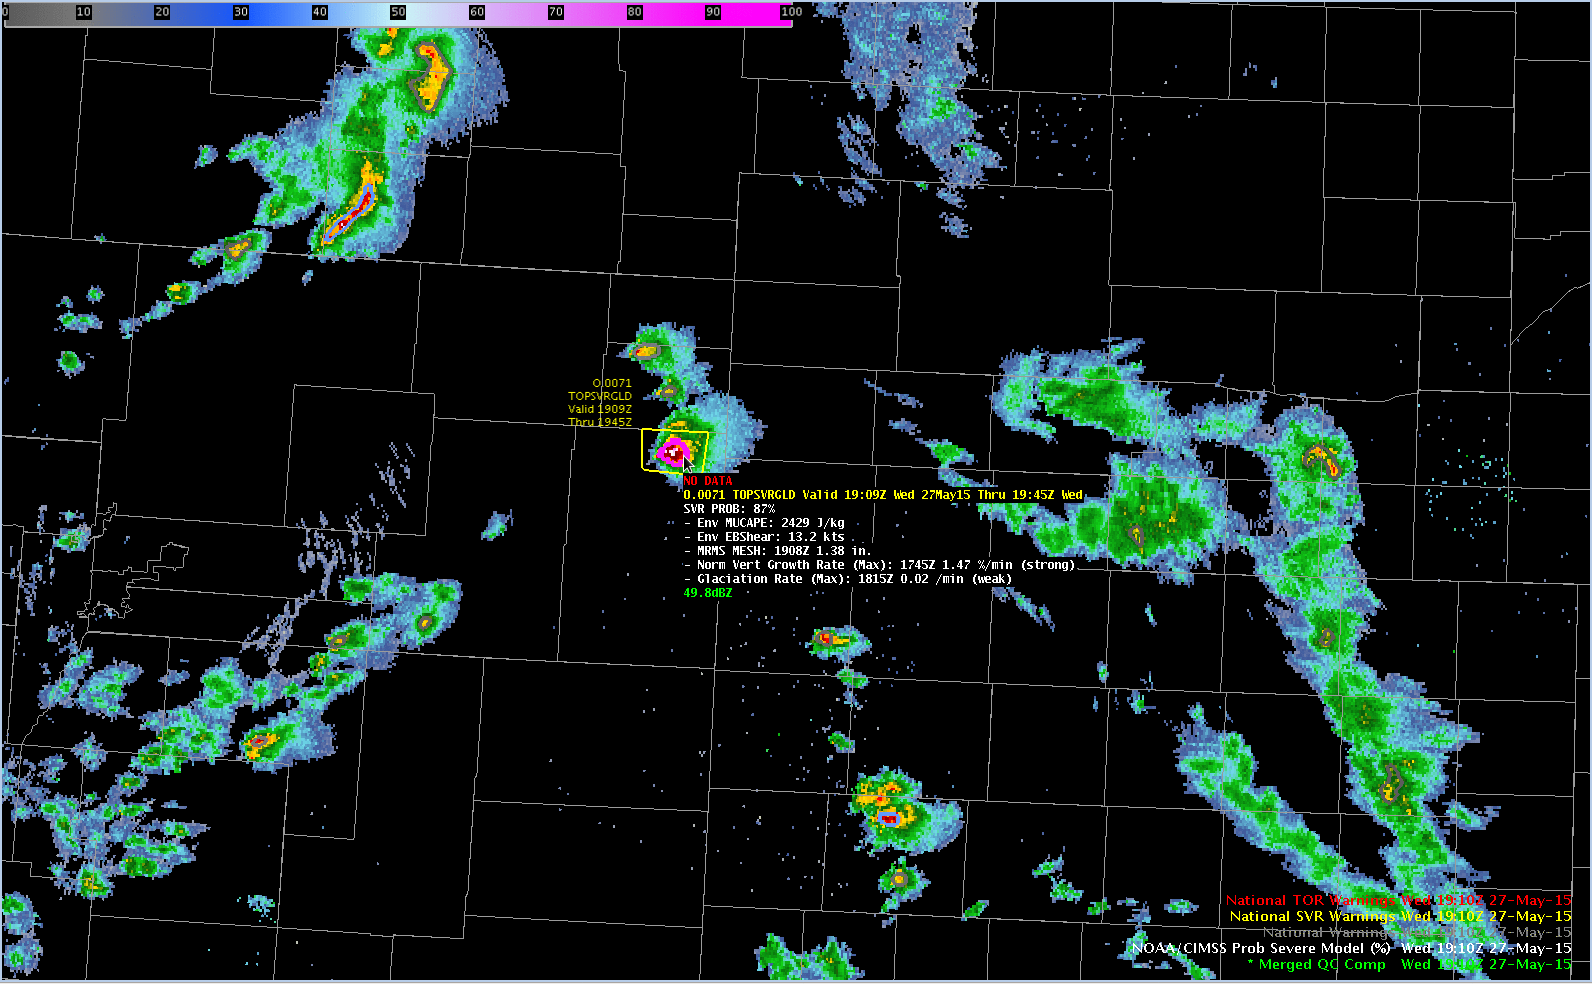 NOAA/CIMSS ProbSevere Product, 1902-1922 UTC on 27 May 2015 [click to play animation]